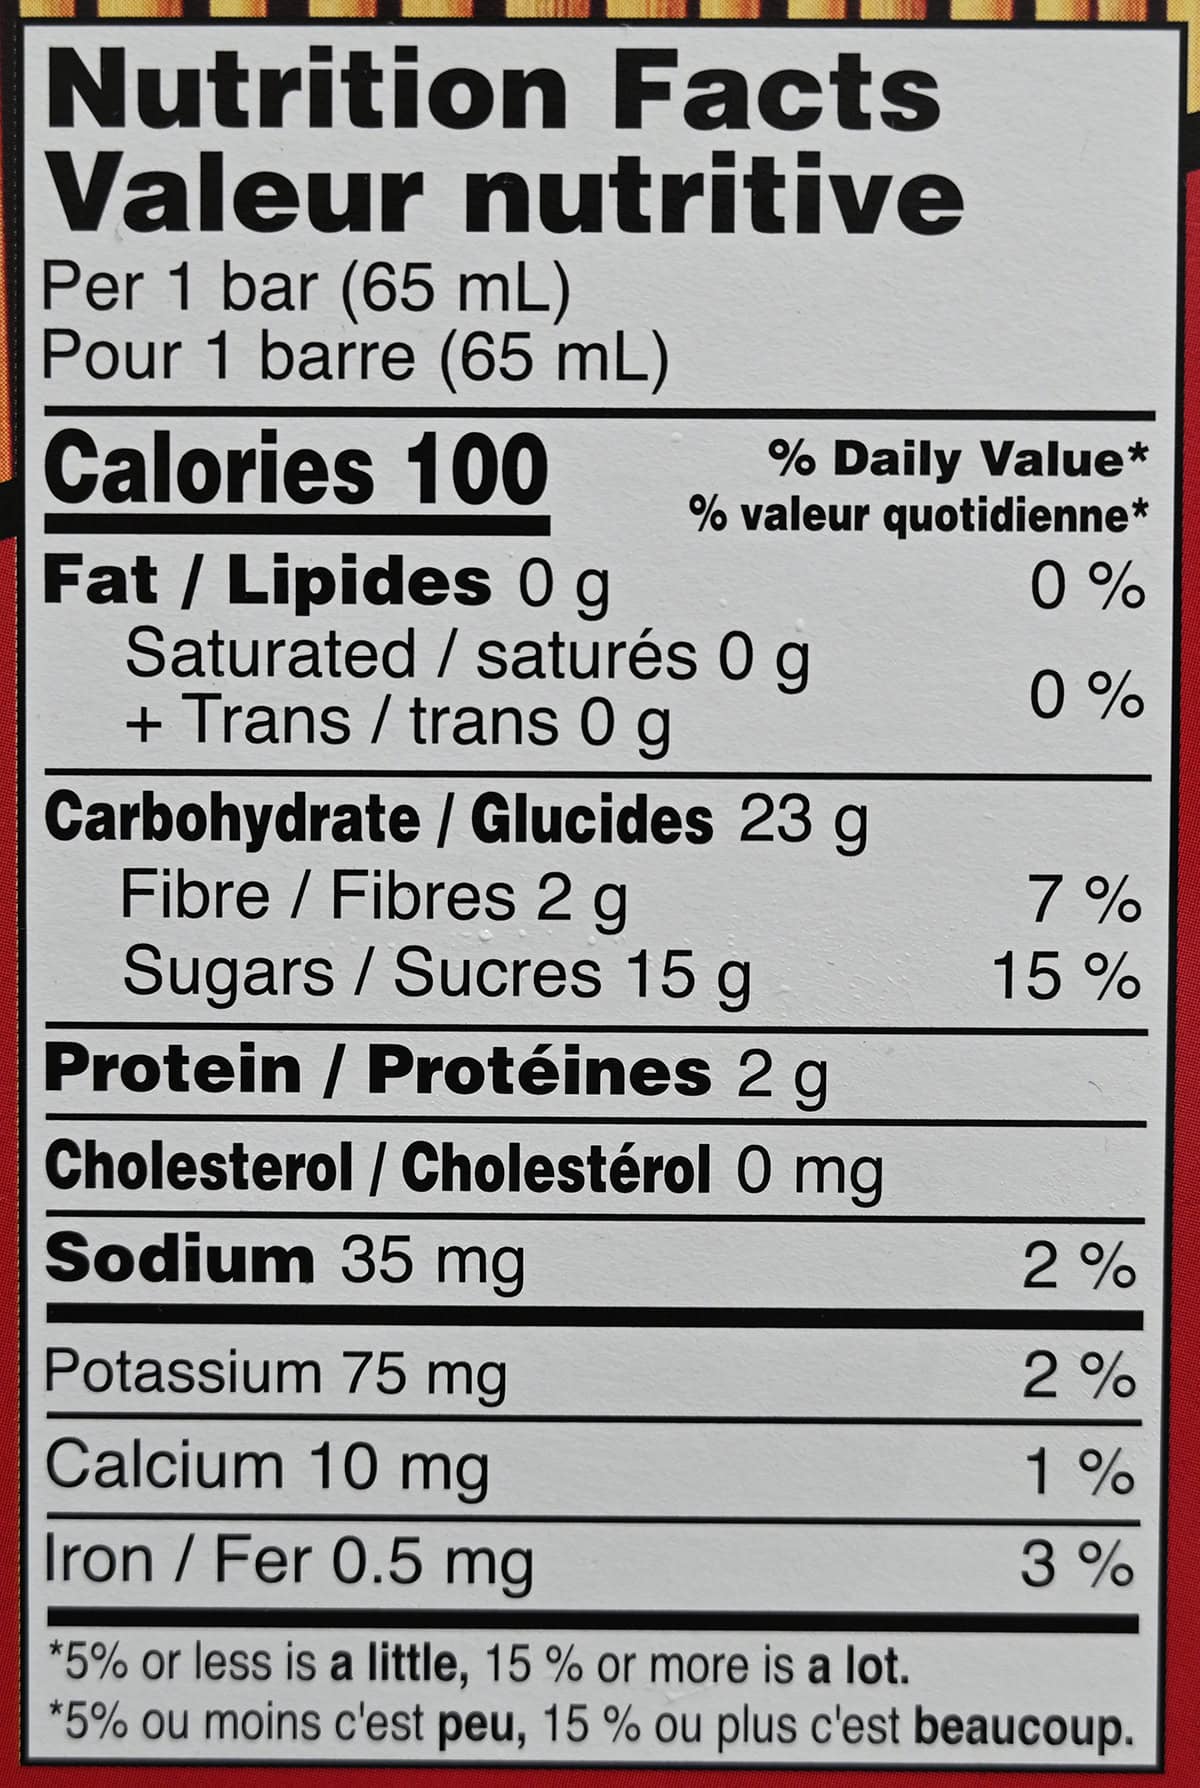 Image of the nutrition facts for the bars from the back of the box.